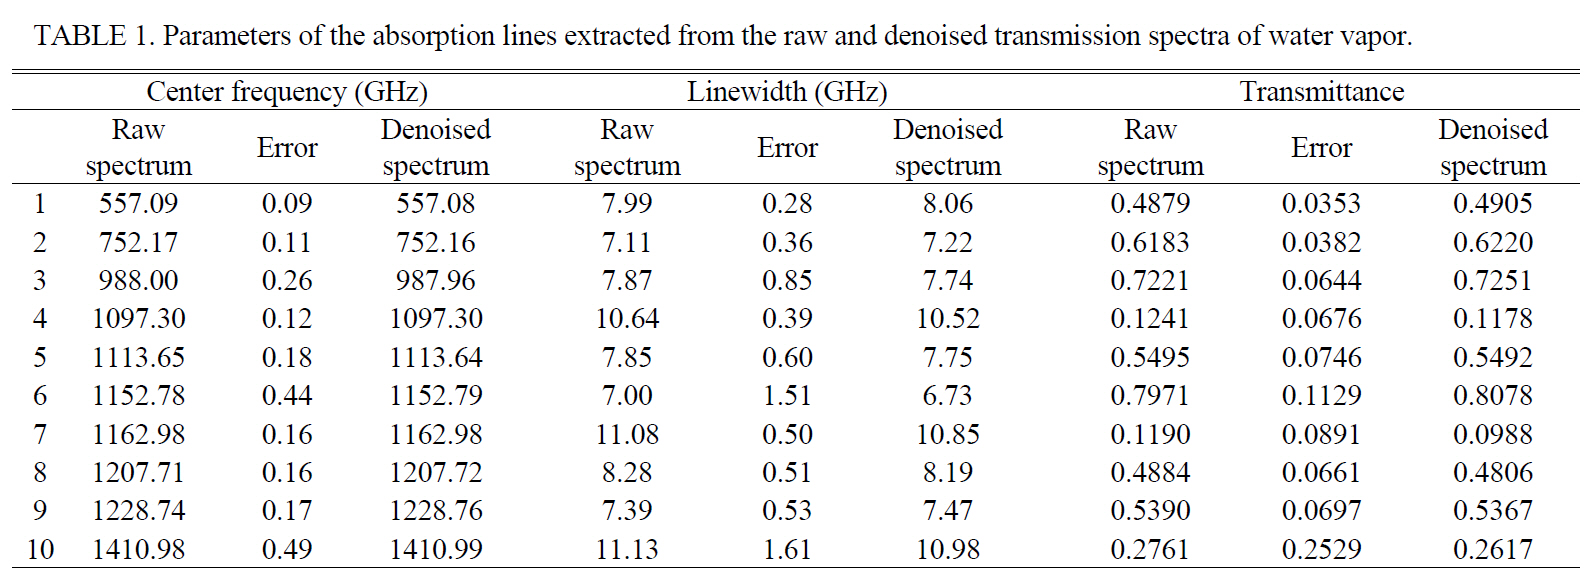 Parameters of the absorption lines extracted from the raw and denoised transmission spectra of water vapor.